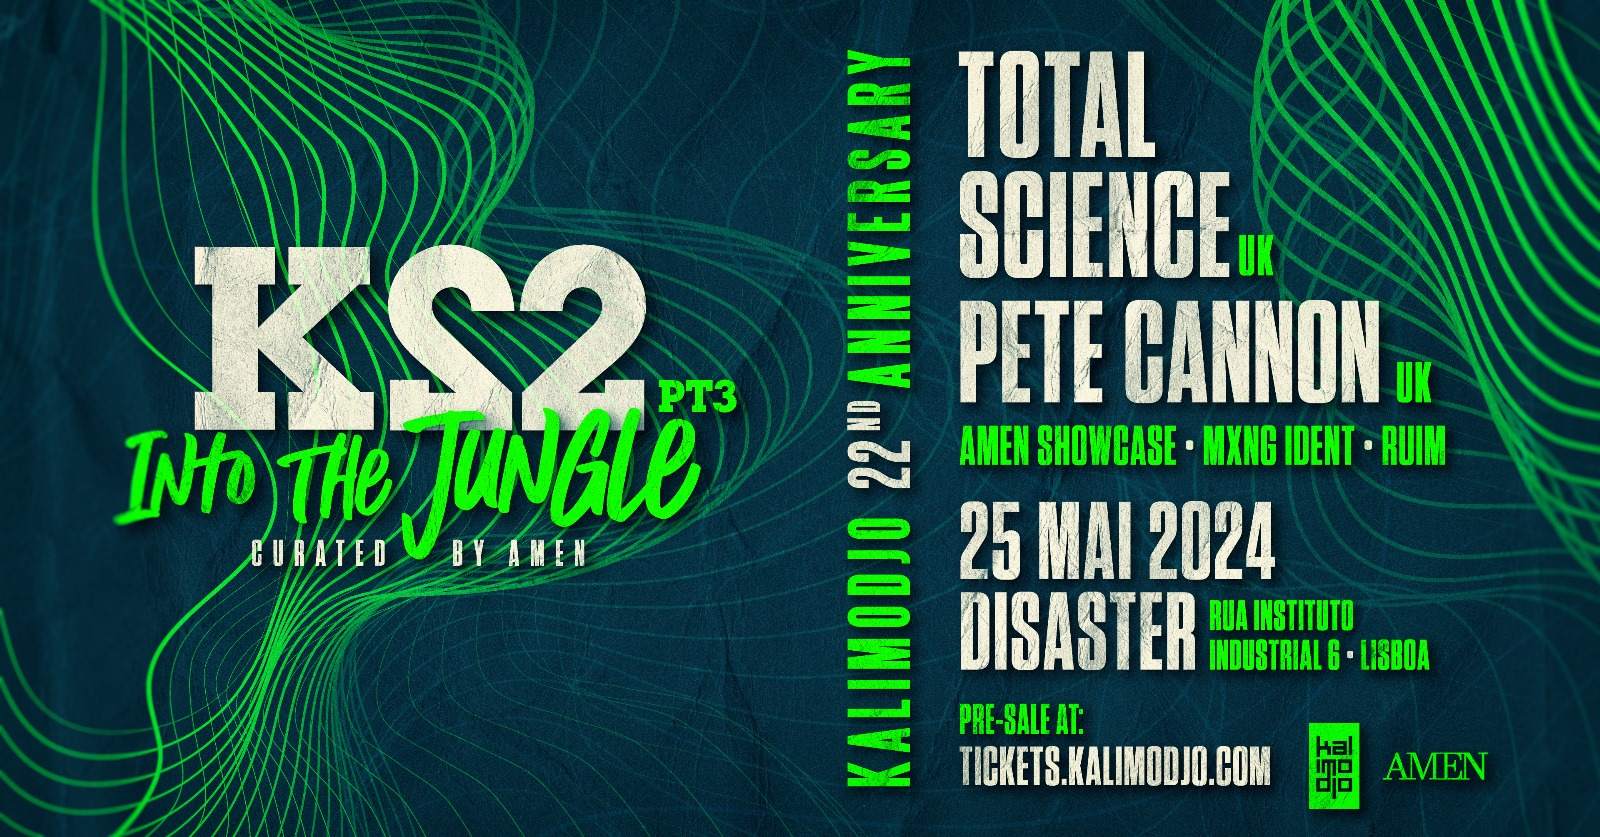 K22 KALIMODJO 22nd bday Part 3 with Total Science & Pete Cannon - フライヤー裏